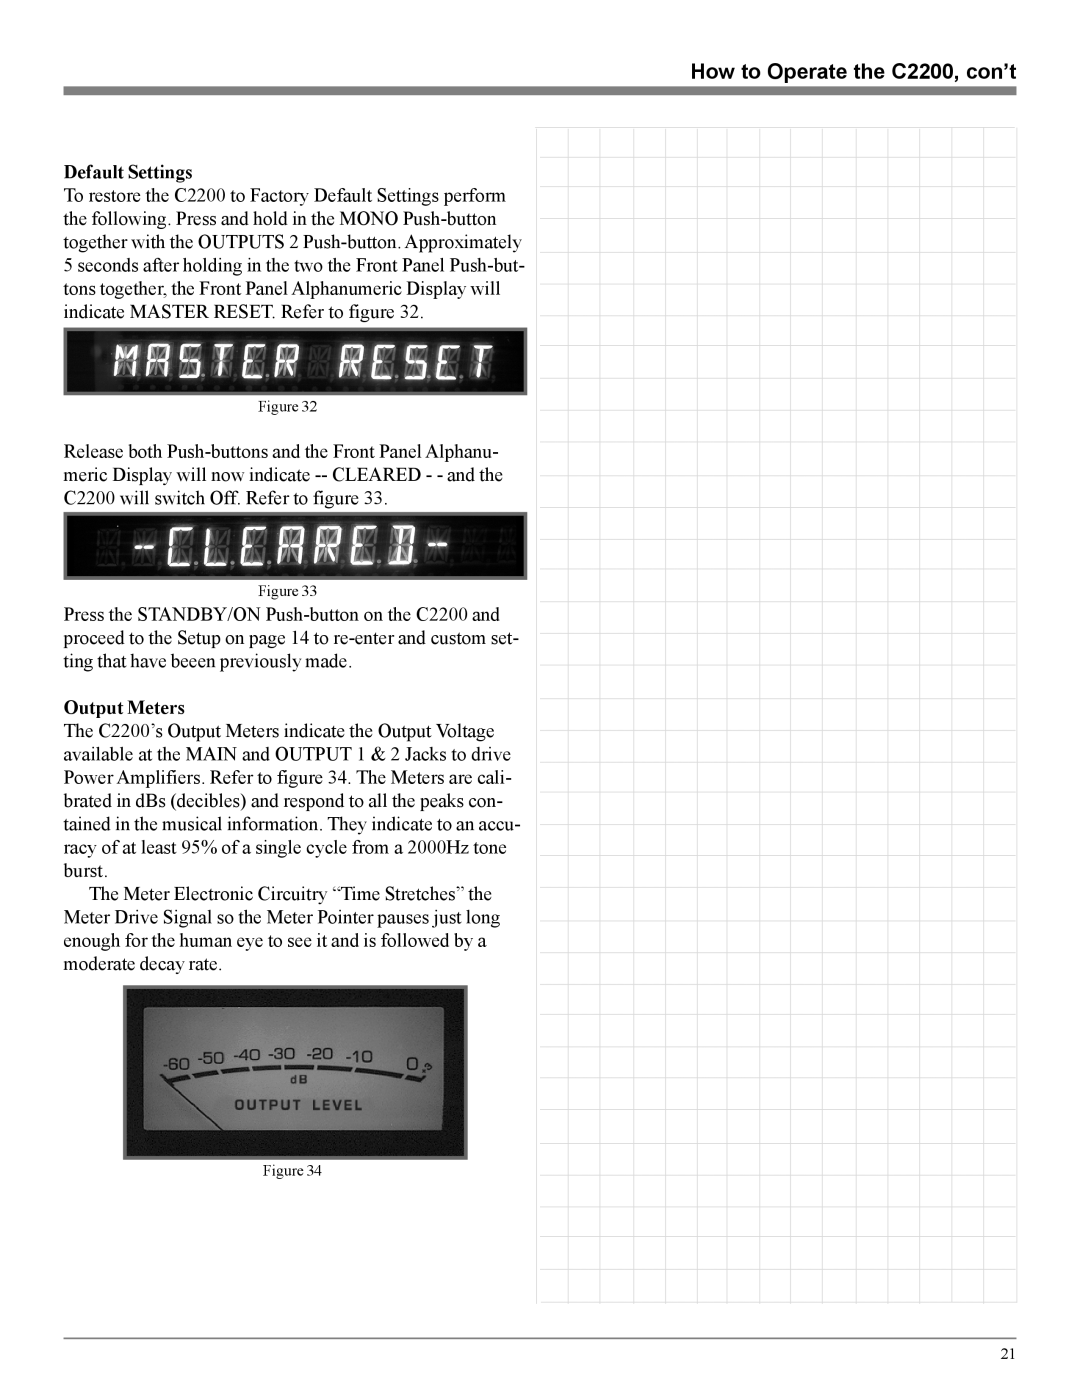 McIntosh owner manual How to Operate the C2200, con’t, Default Settings, Output Meters 